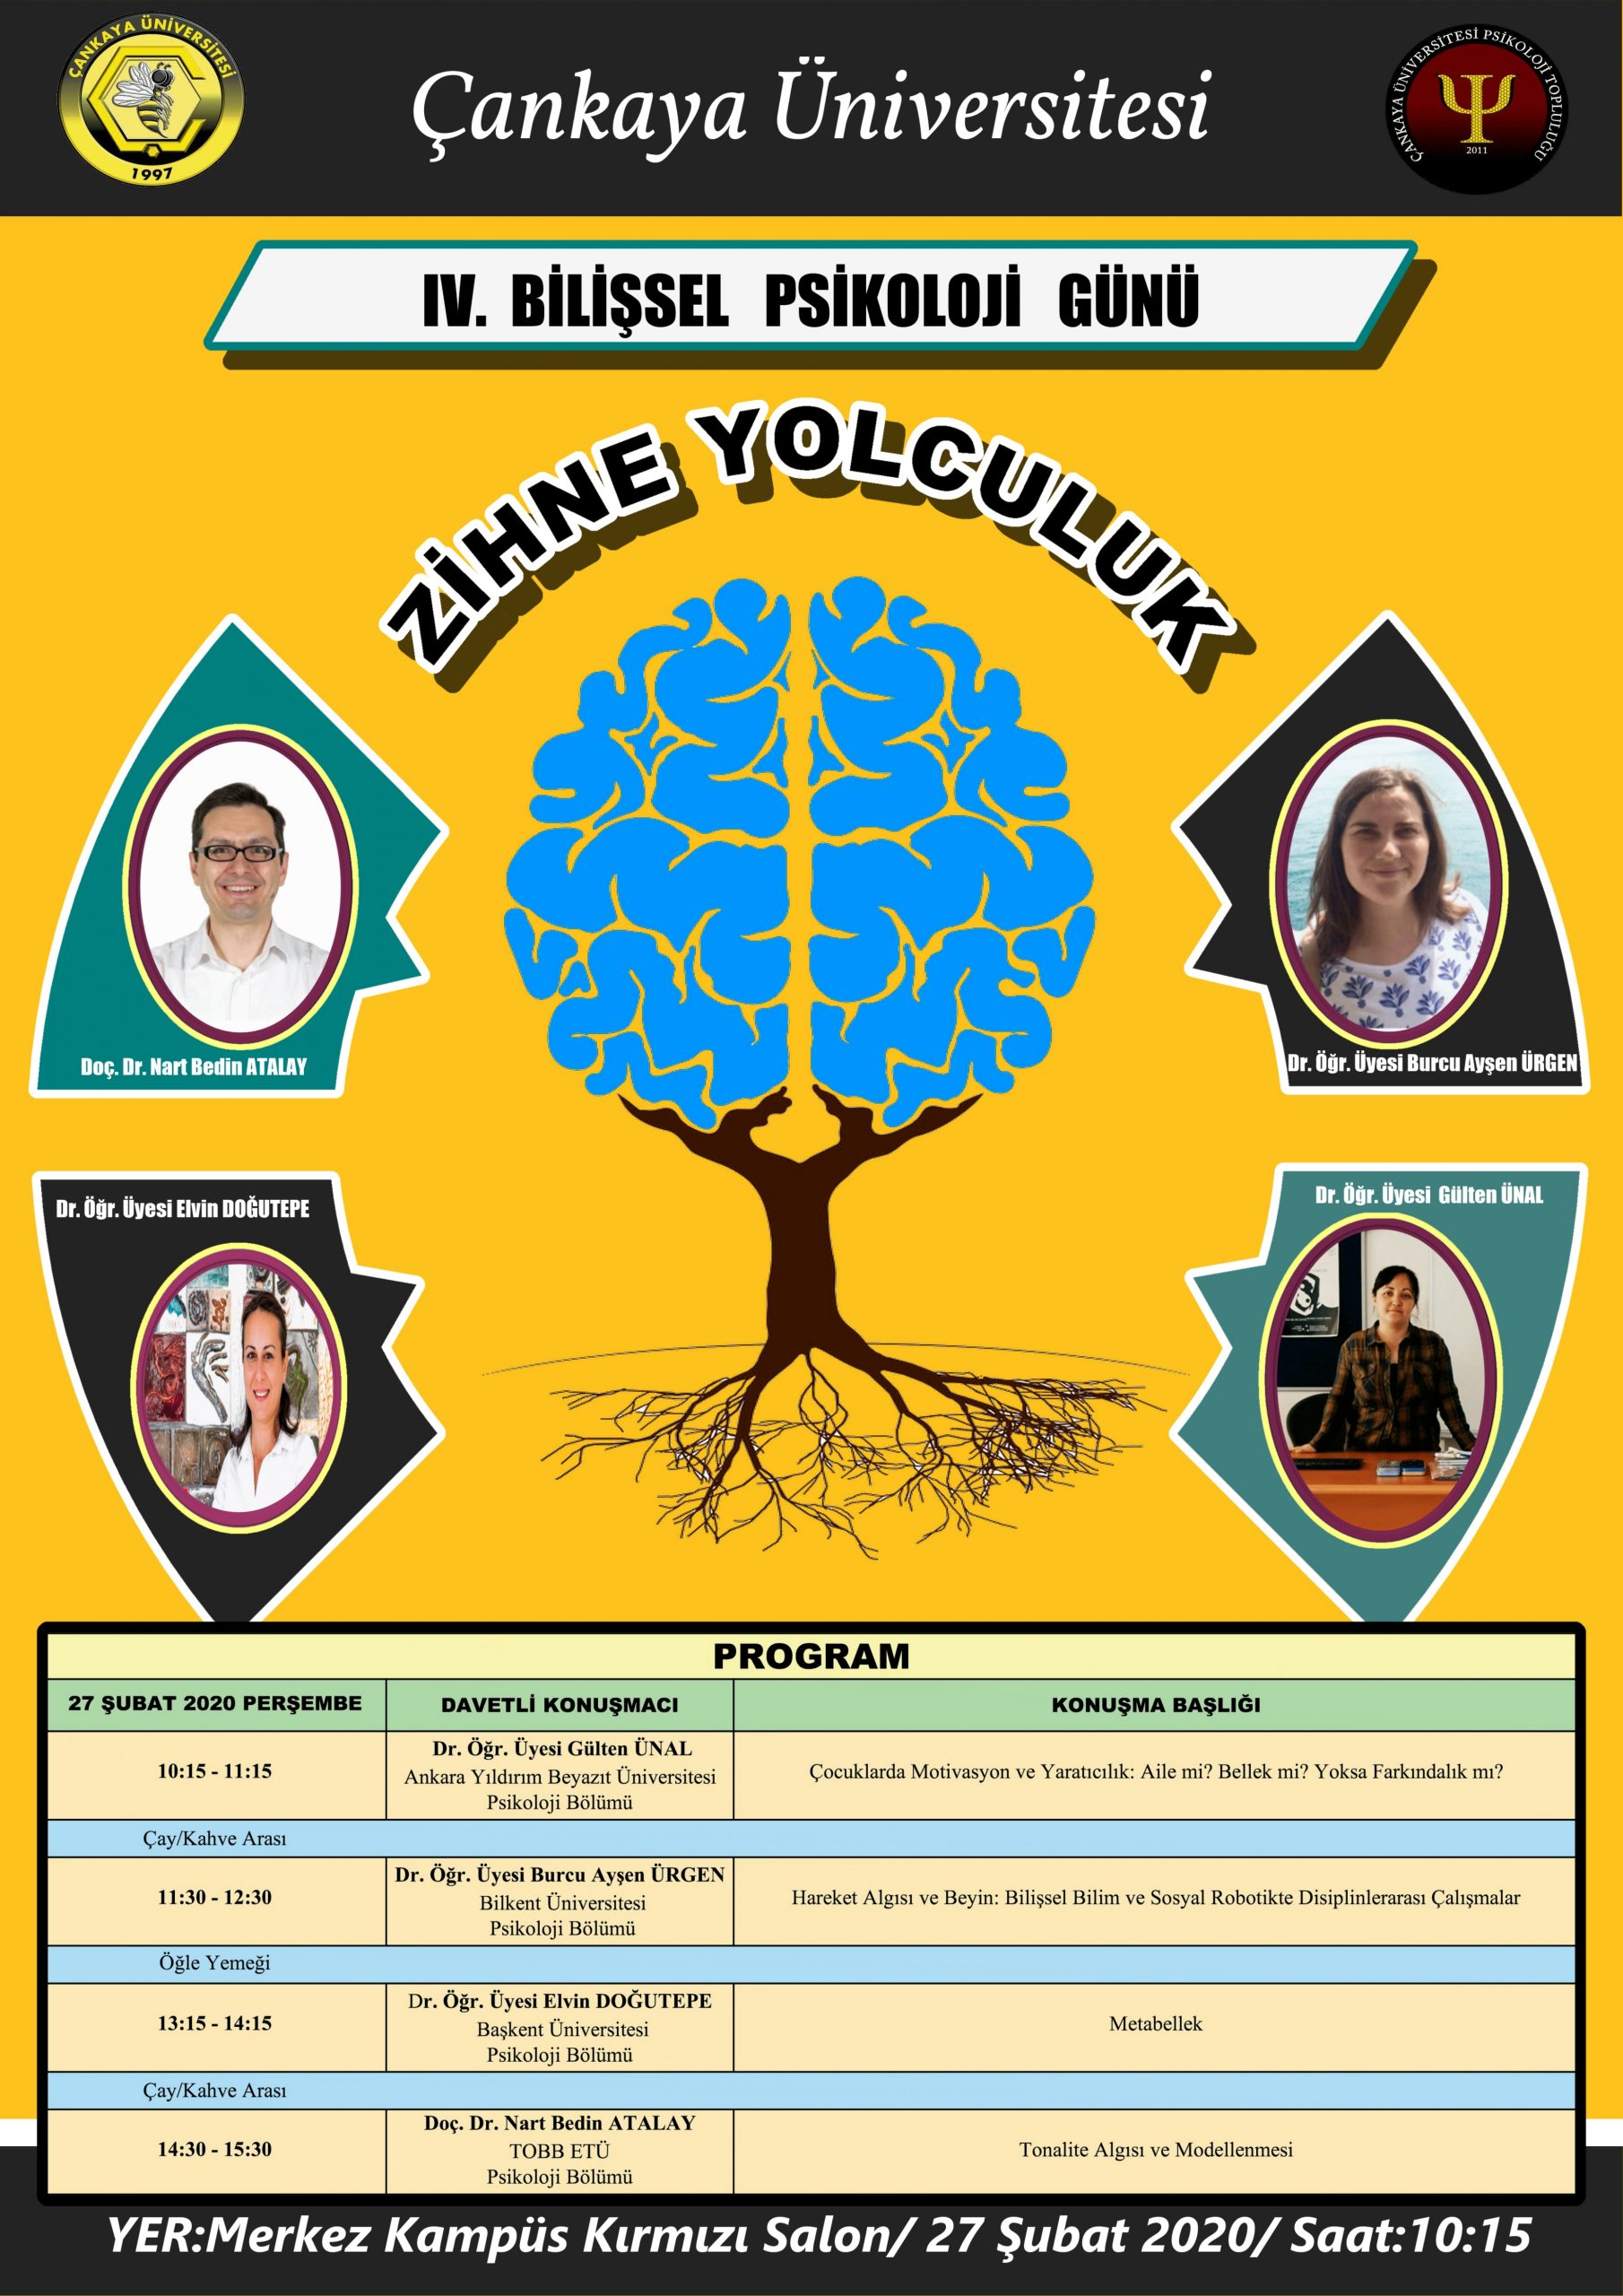 Events of 2019-2020 Academic Year